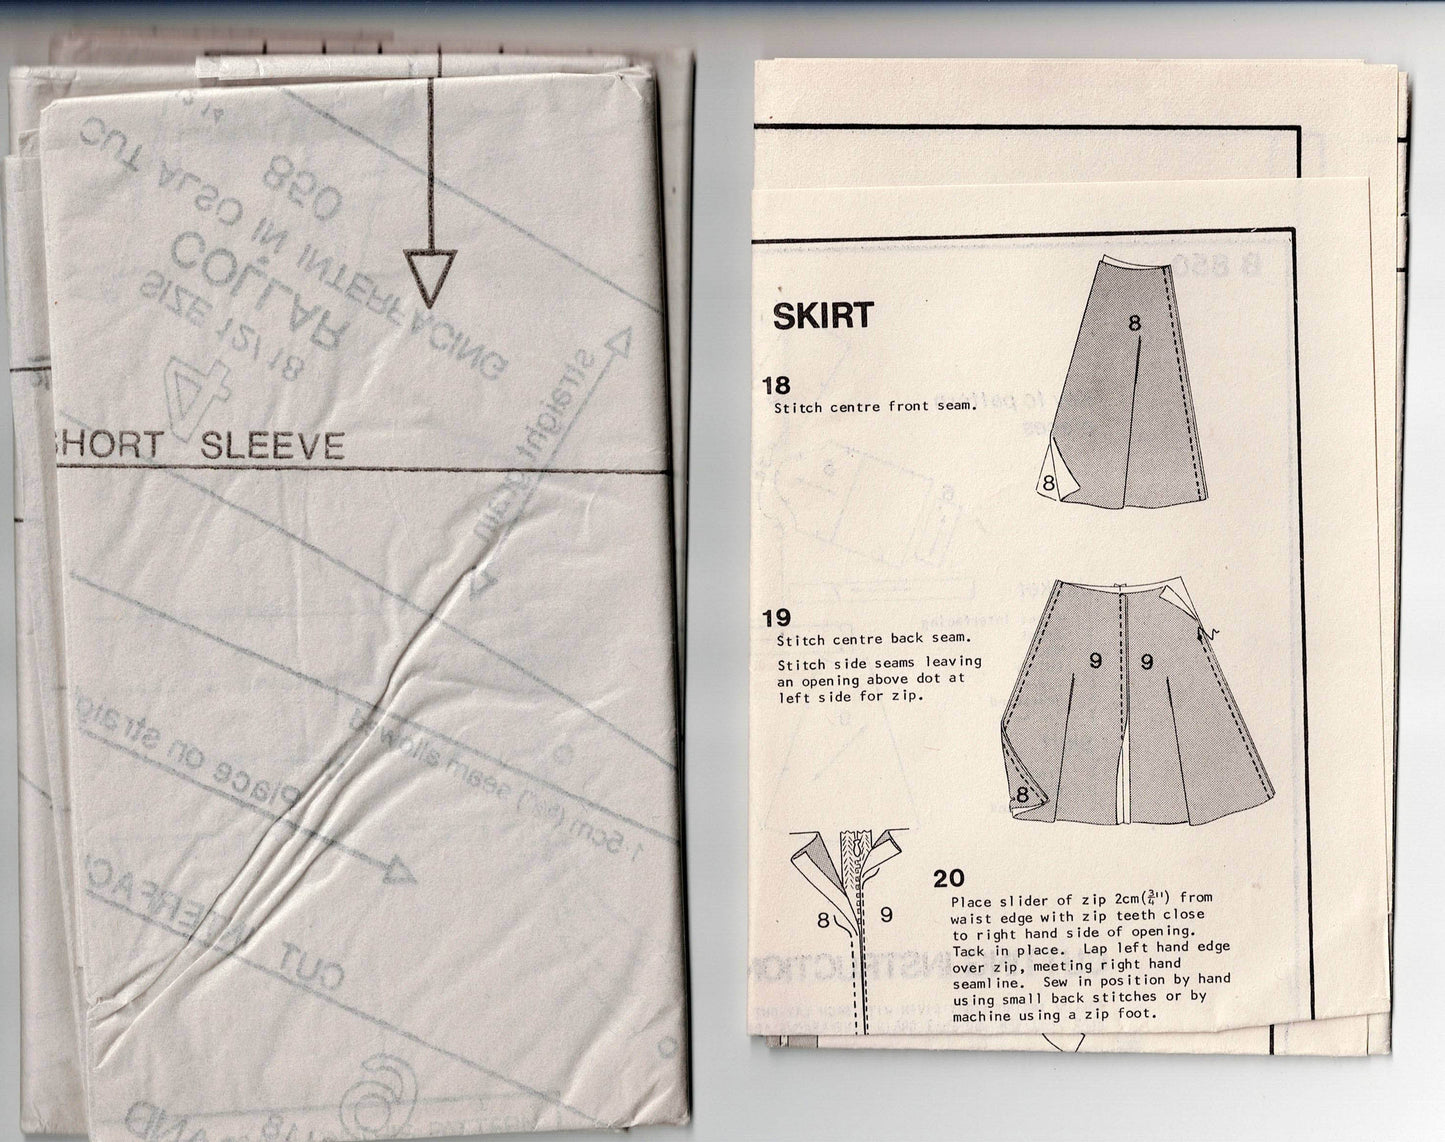 Woman's Weekly B 850 Womens Pin Tucked Jacket & Skirt 1970s Vintage Sewing Pattern Size 12 - 18 UNCUT Factory Folded